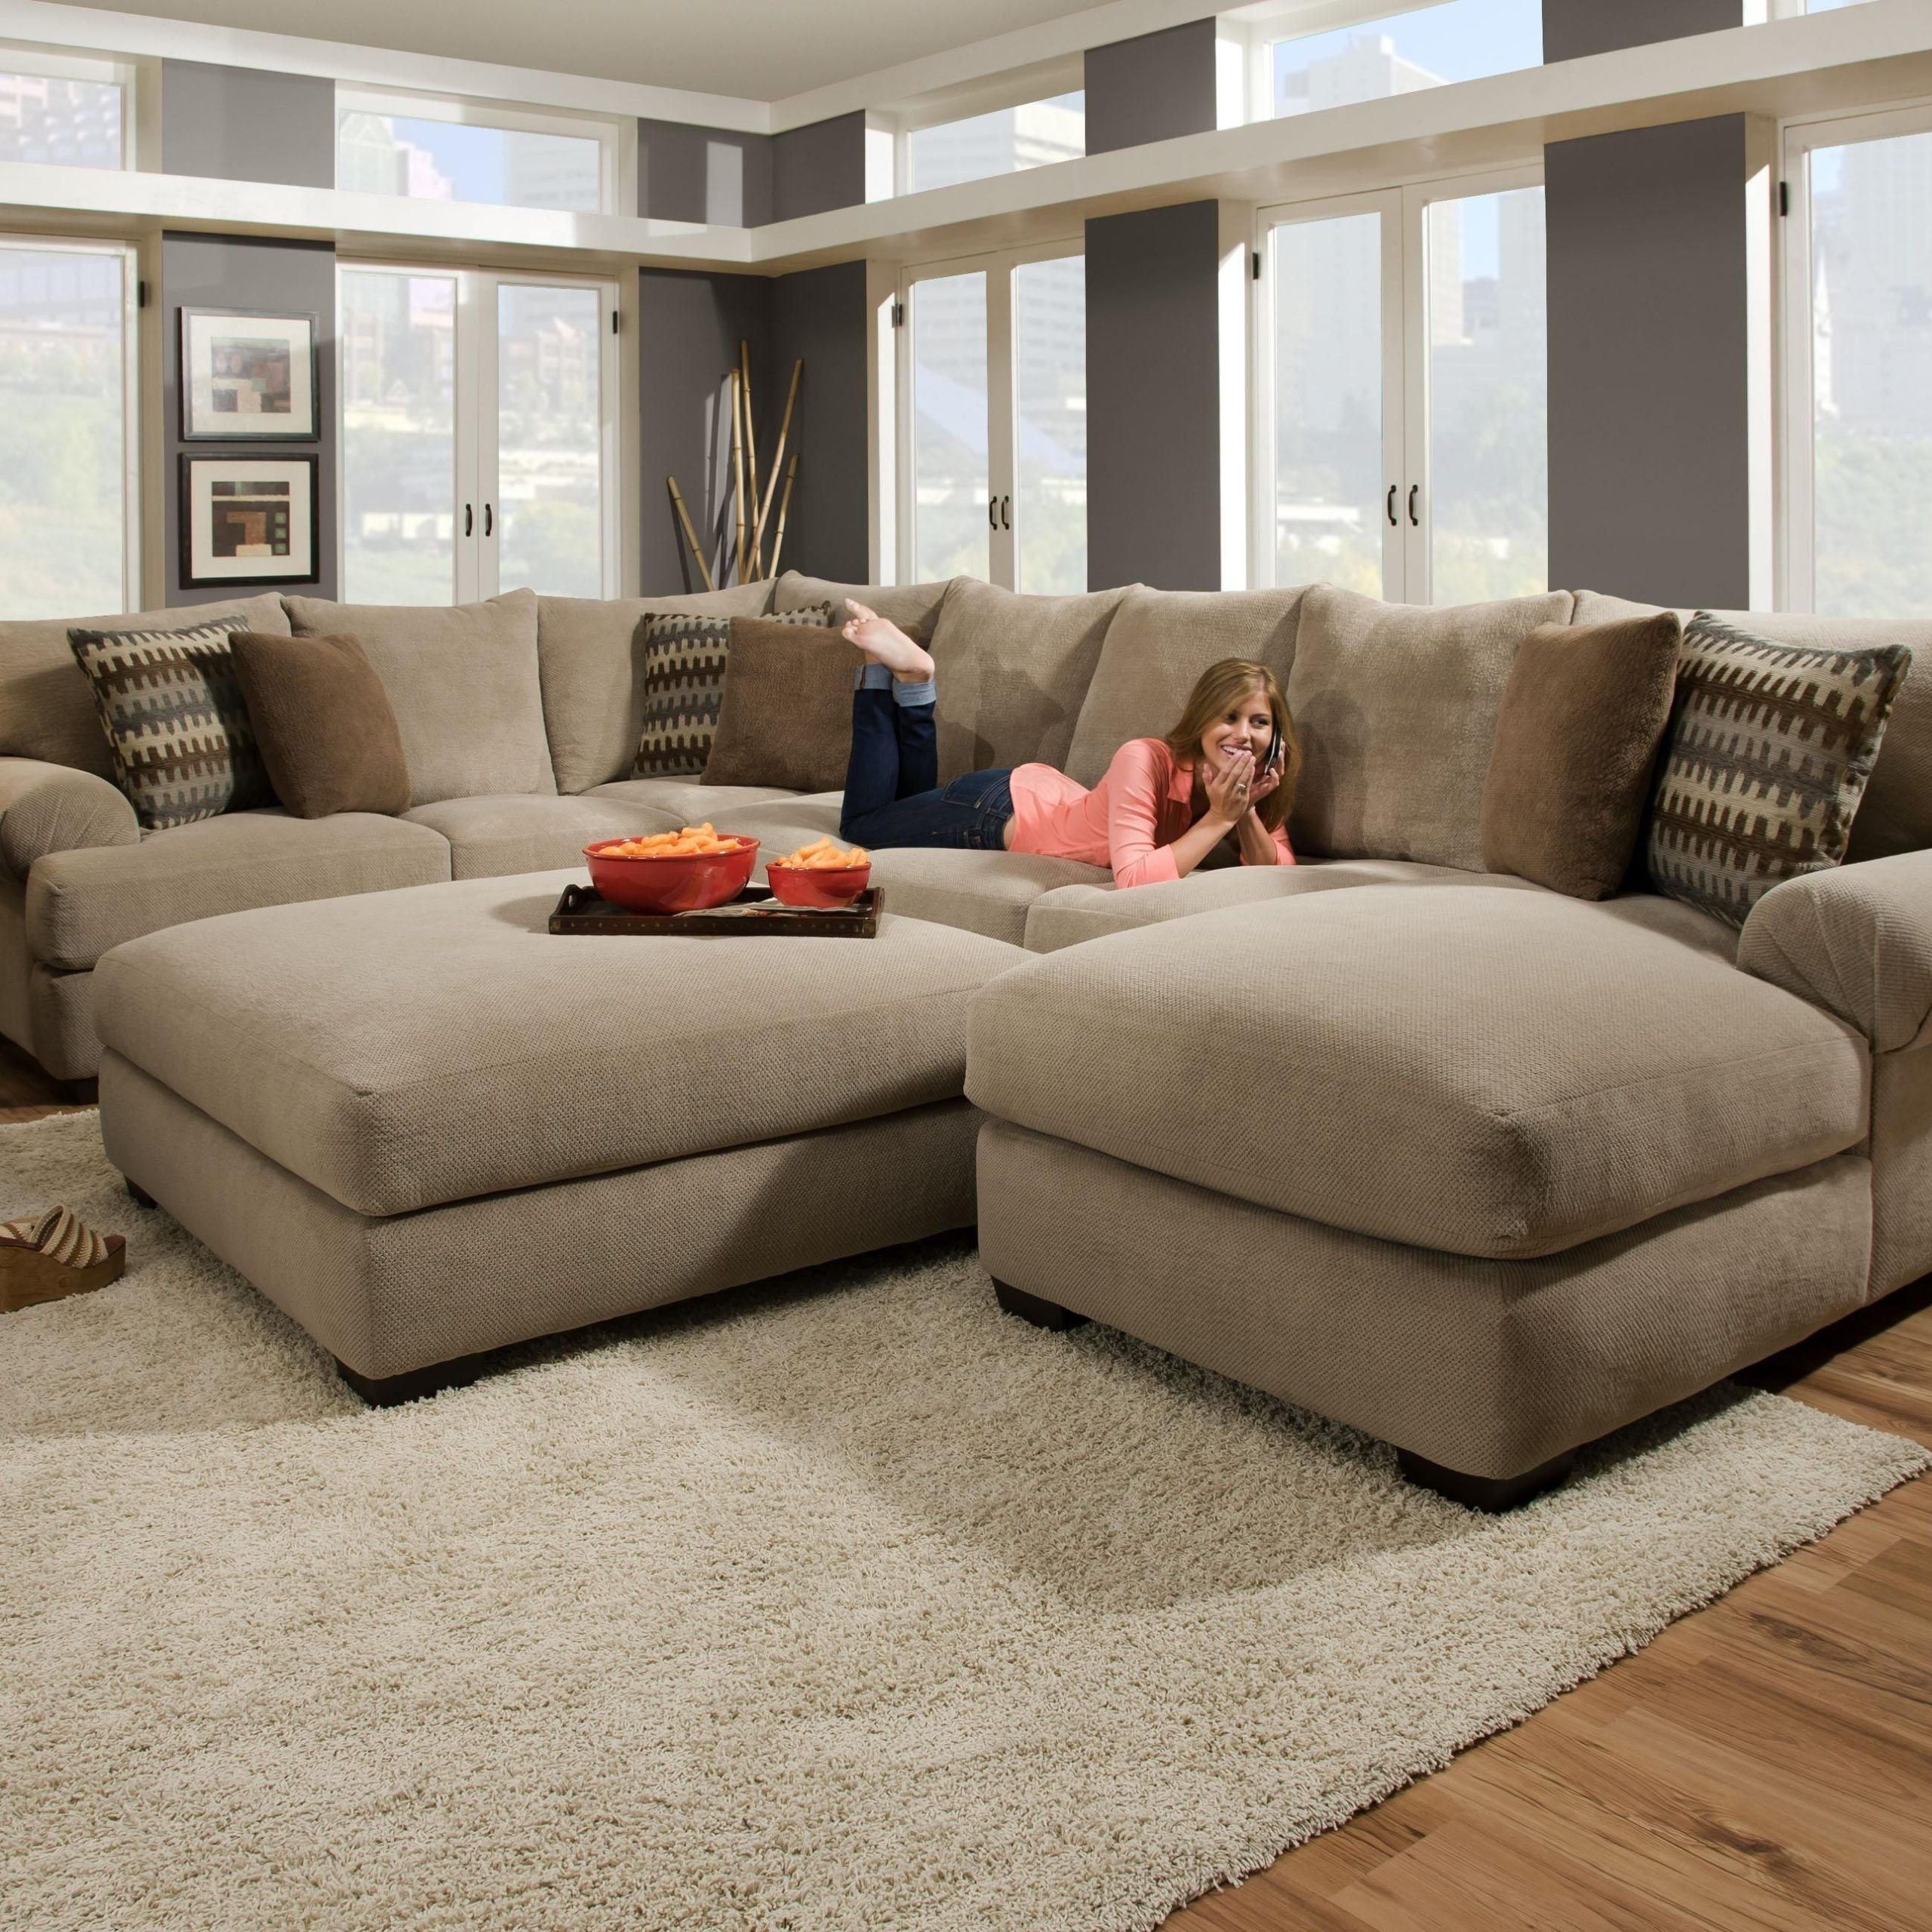 Best 10+ Of Deep U Shaped Sectionals | Comfortable Sectional Sofa For U Shaped Couches In Beige (View 13 of 20)